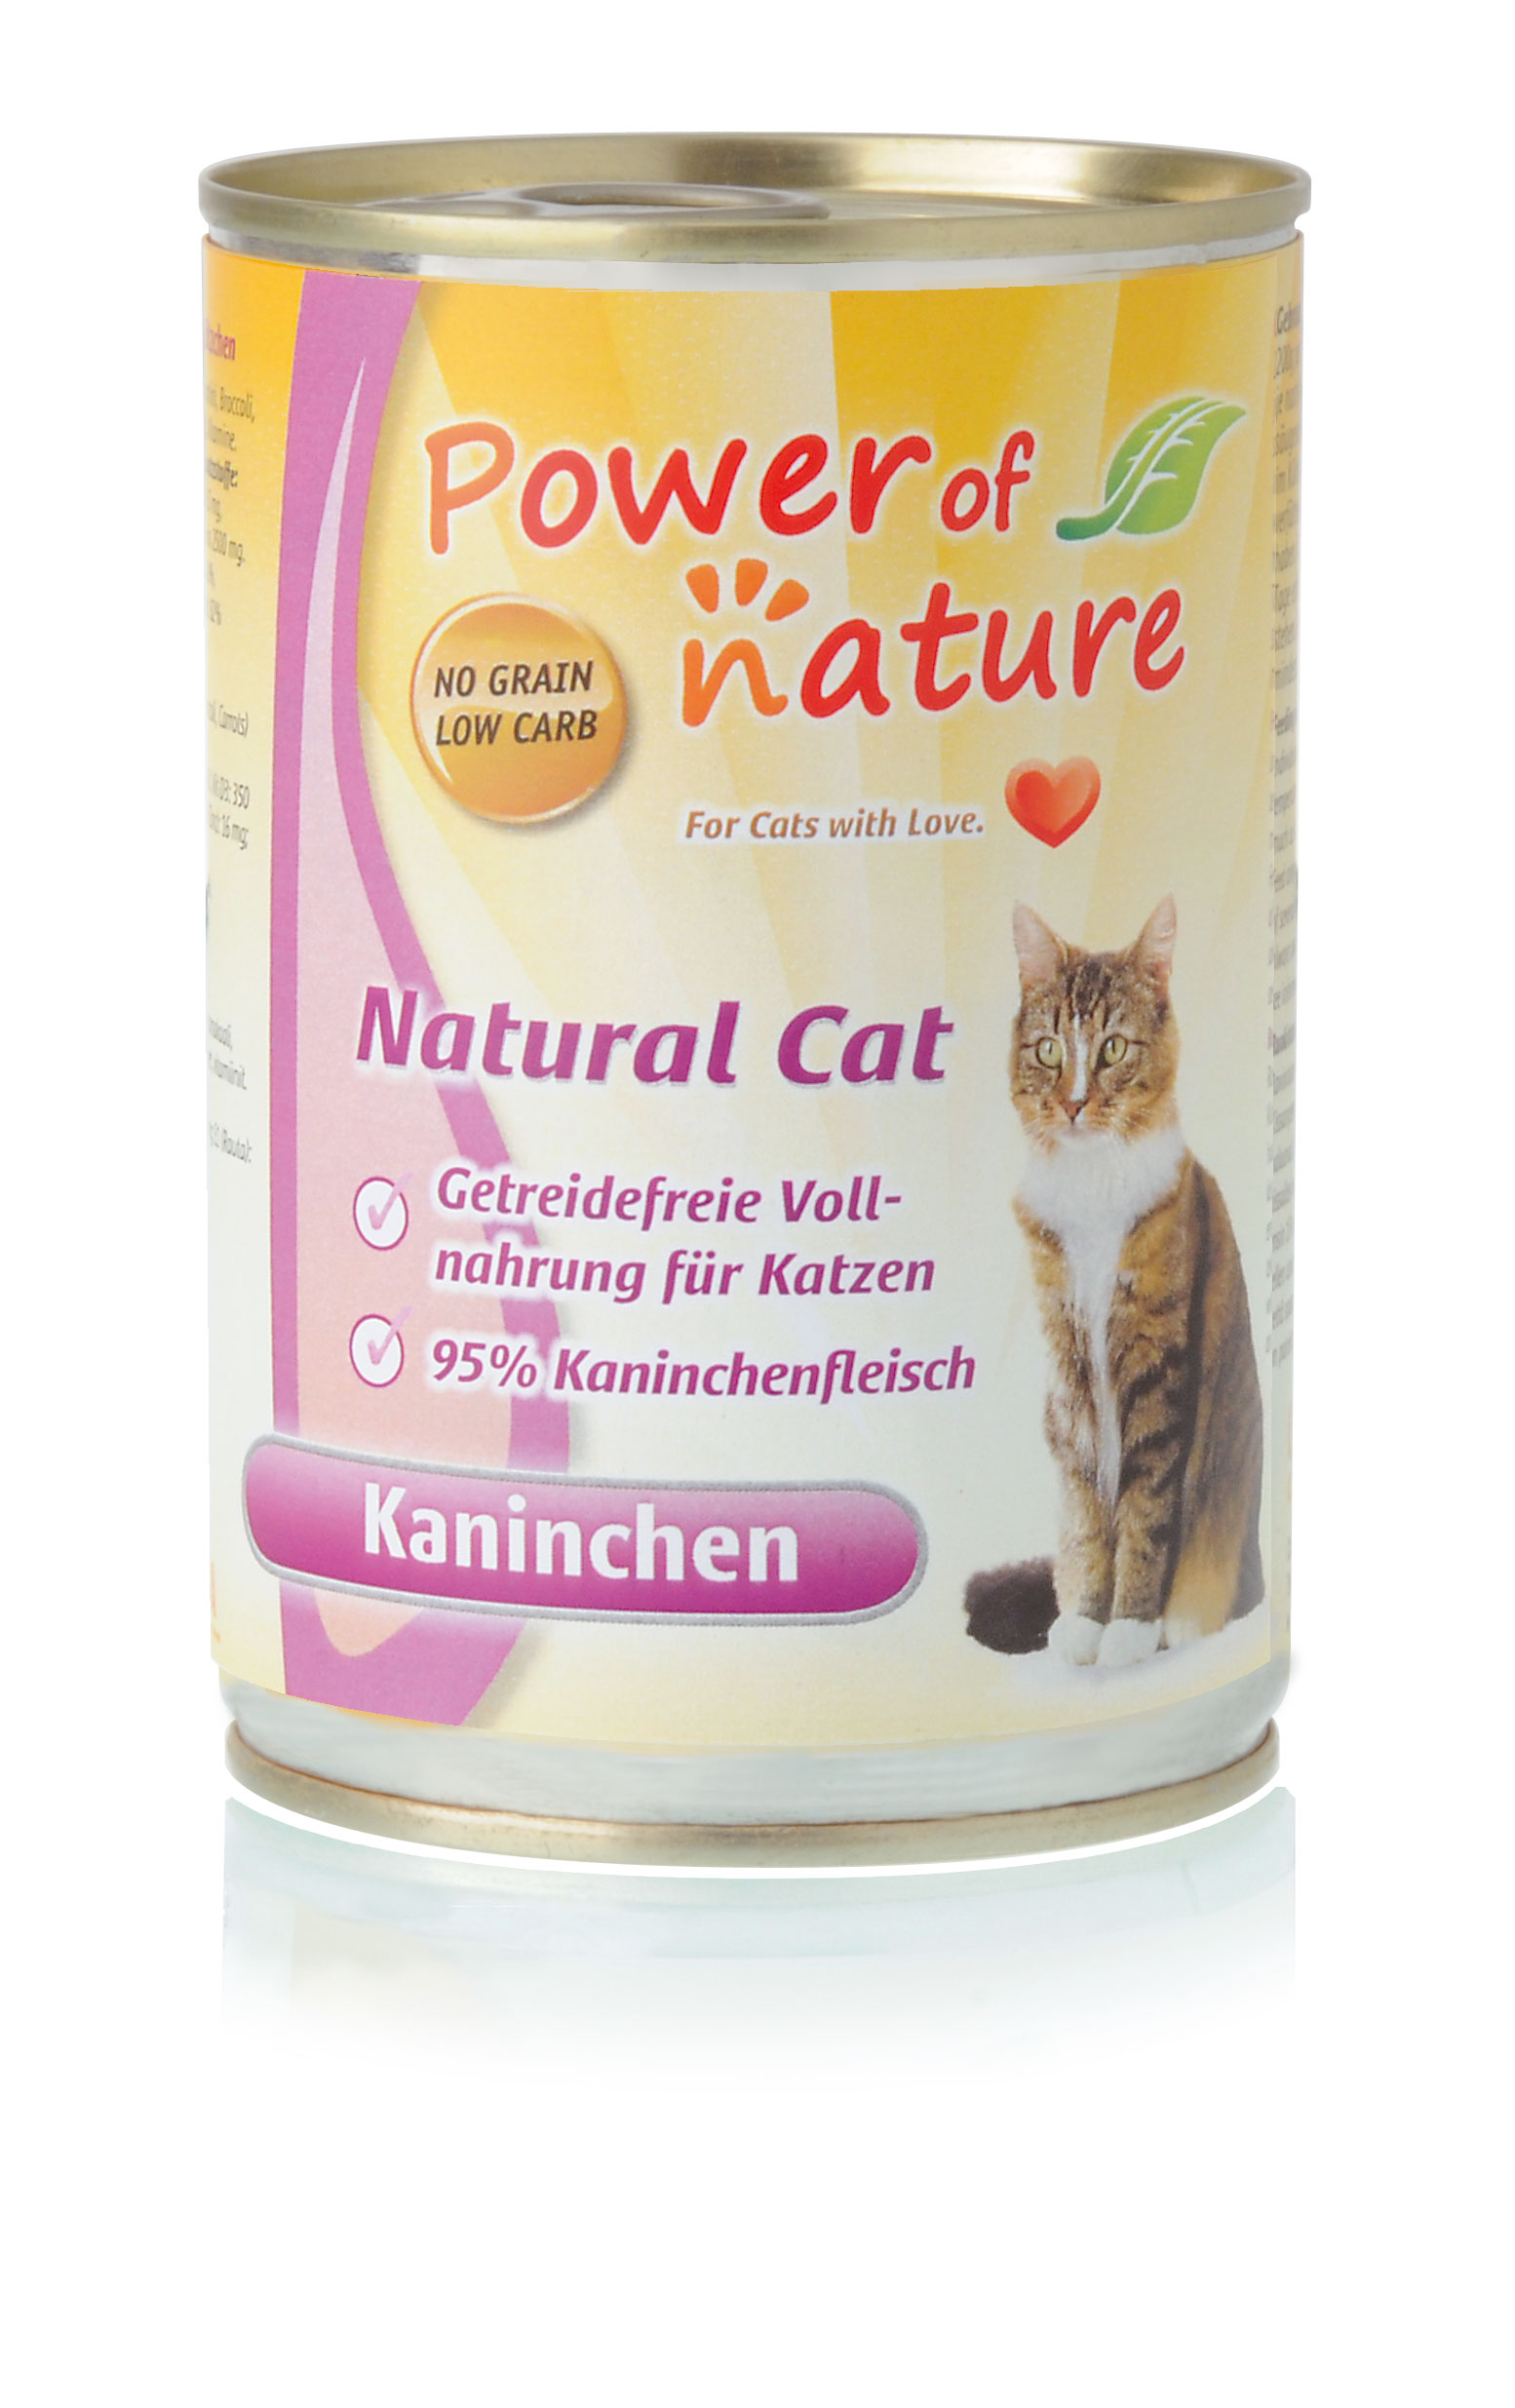 Power of Nature Natural Cat Dose Kaninchen 400g